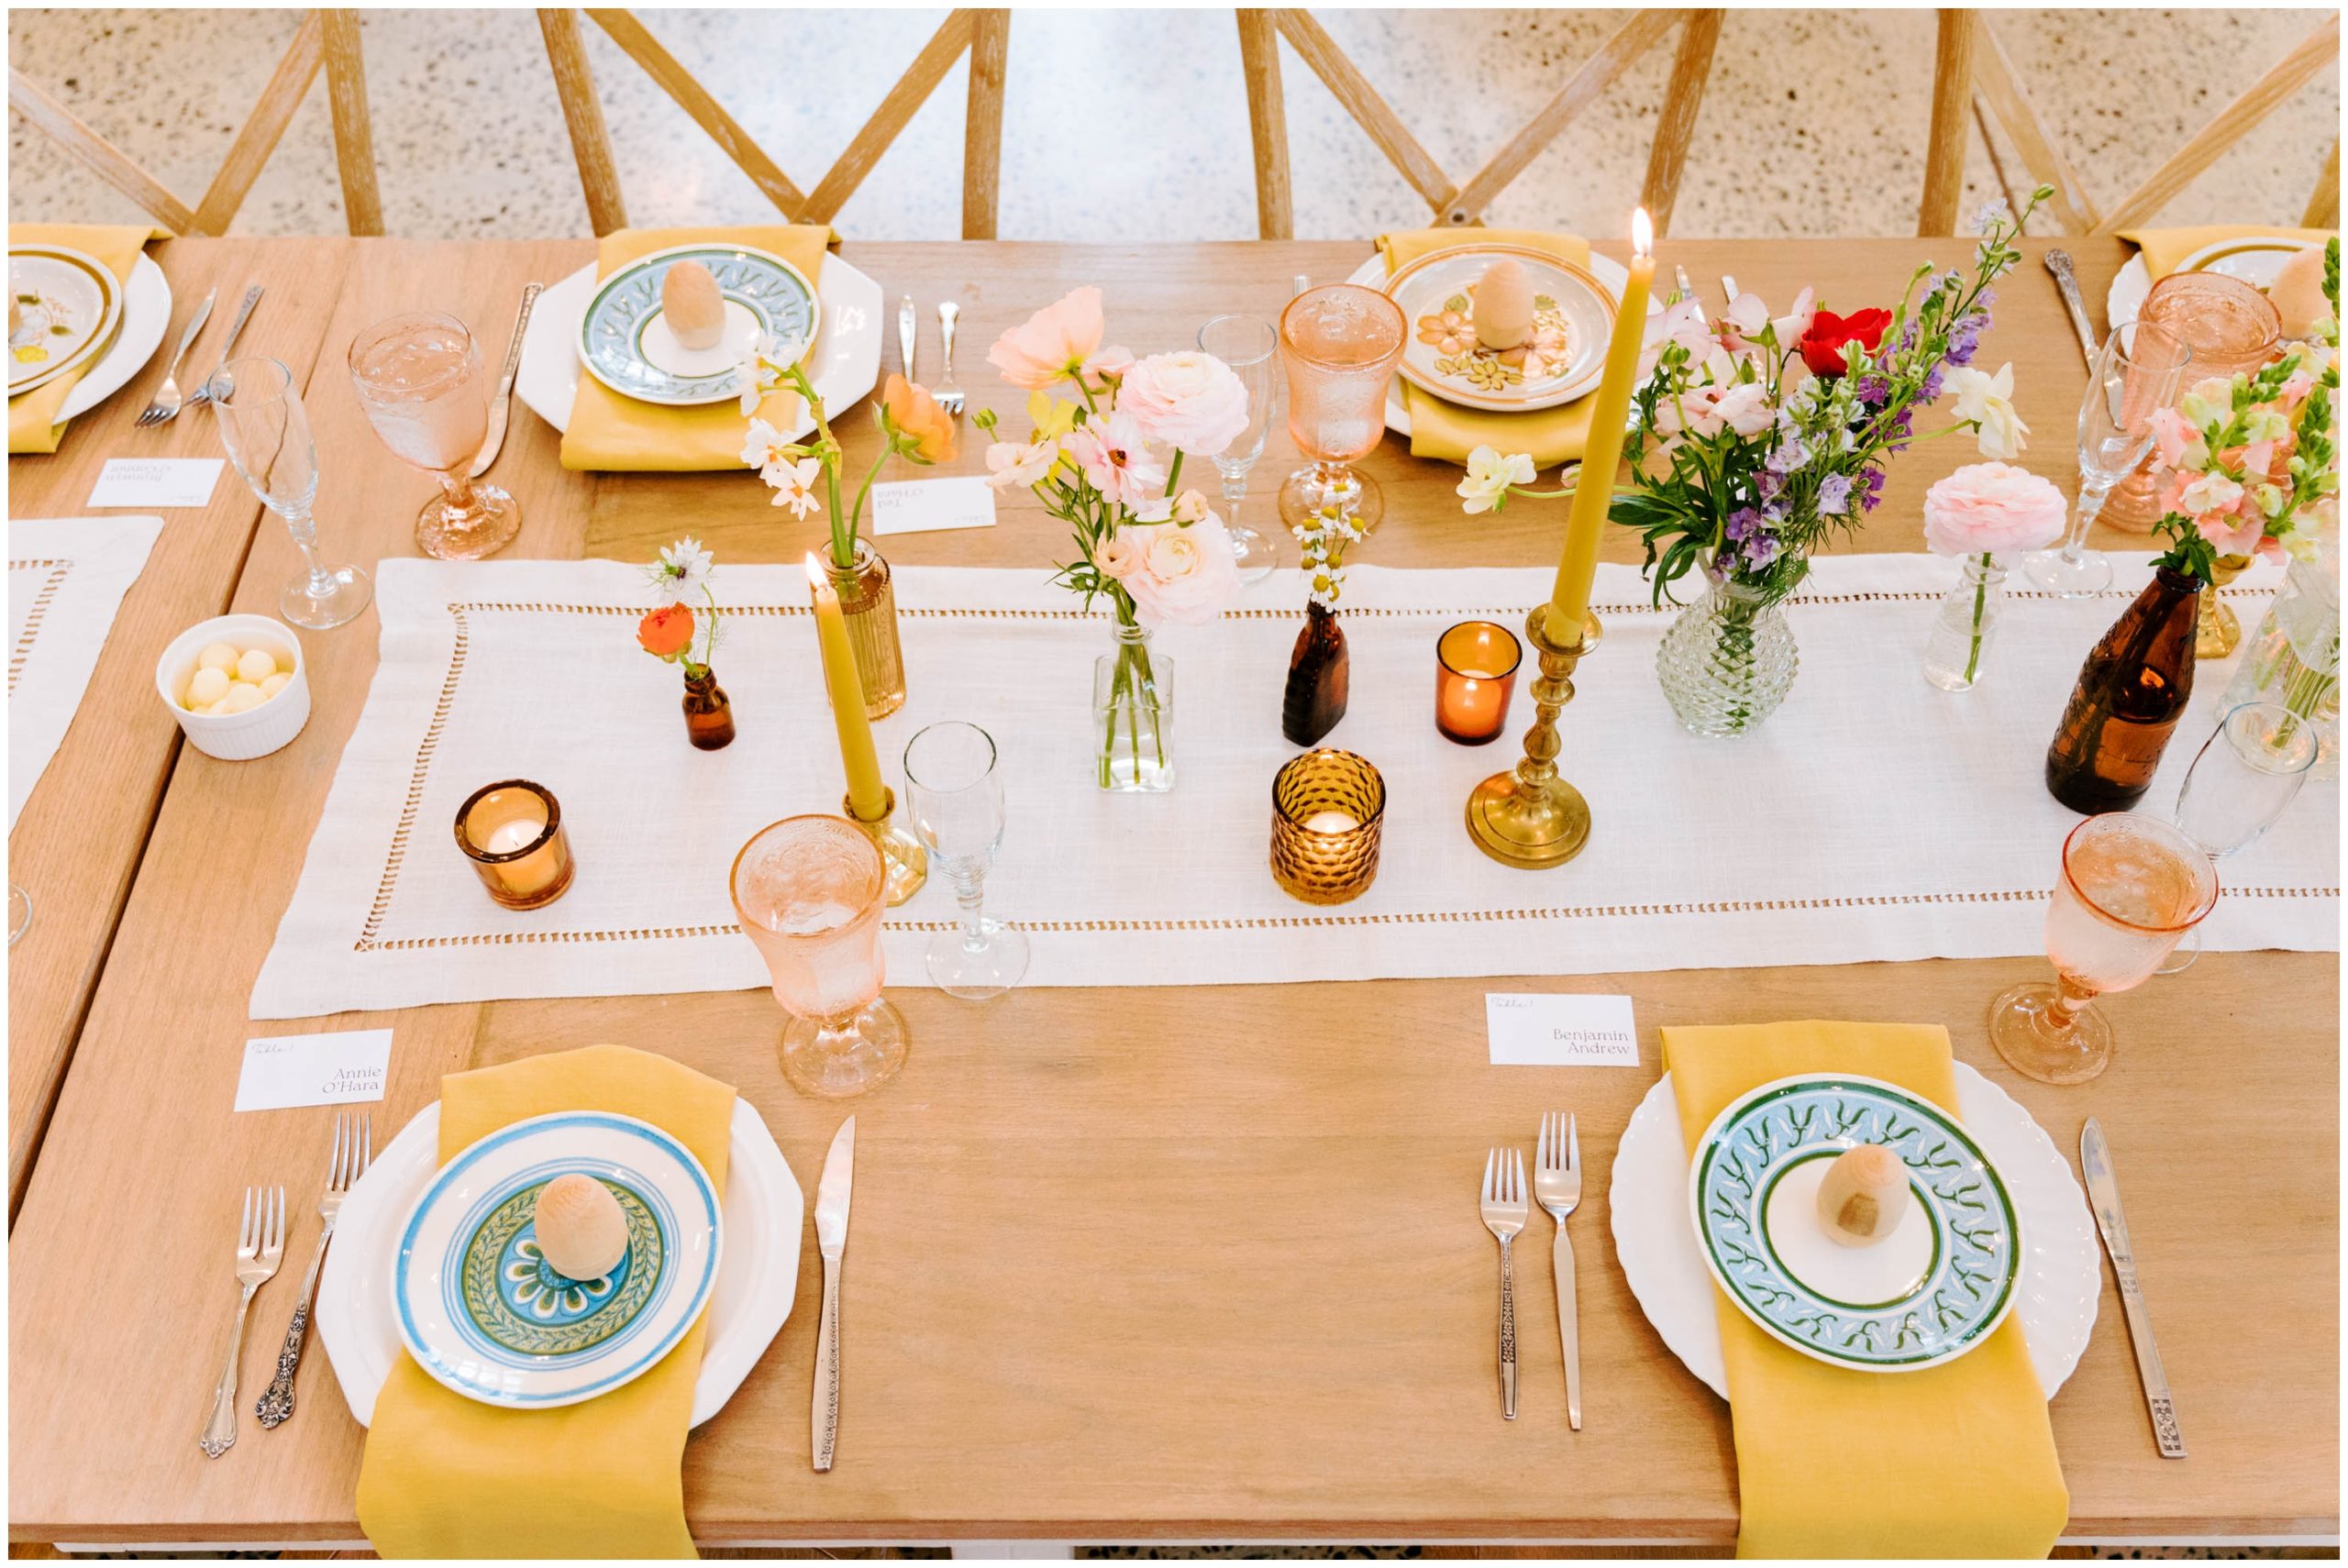 White and yellow table linens, amber votives, and colorful florals for a spring wedding reception